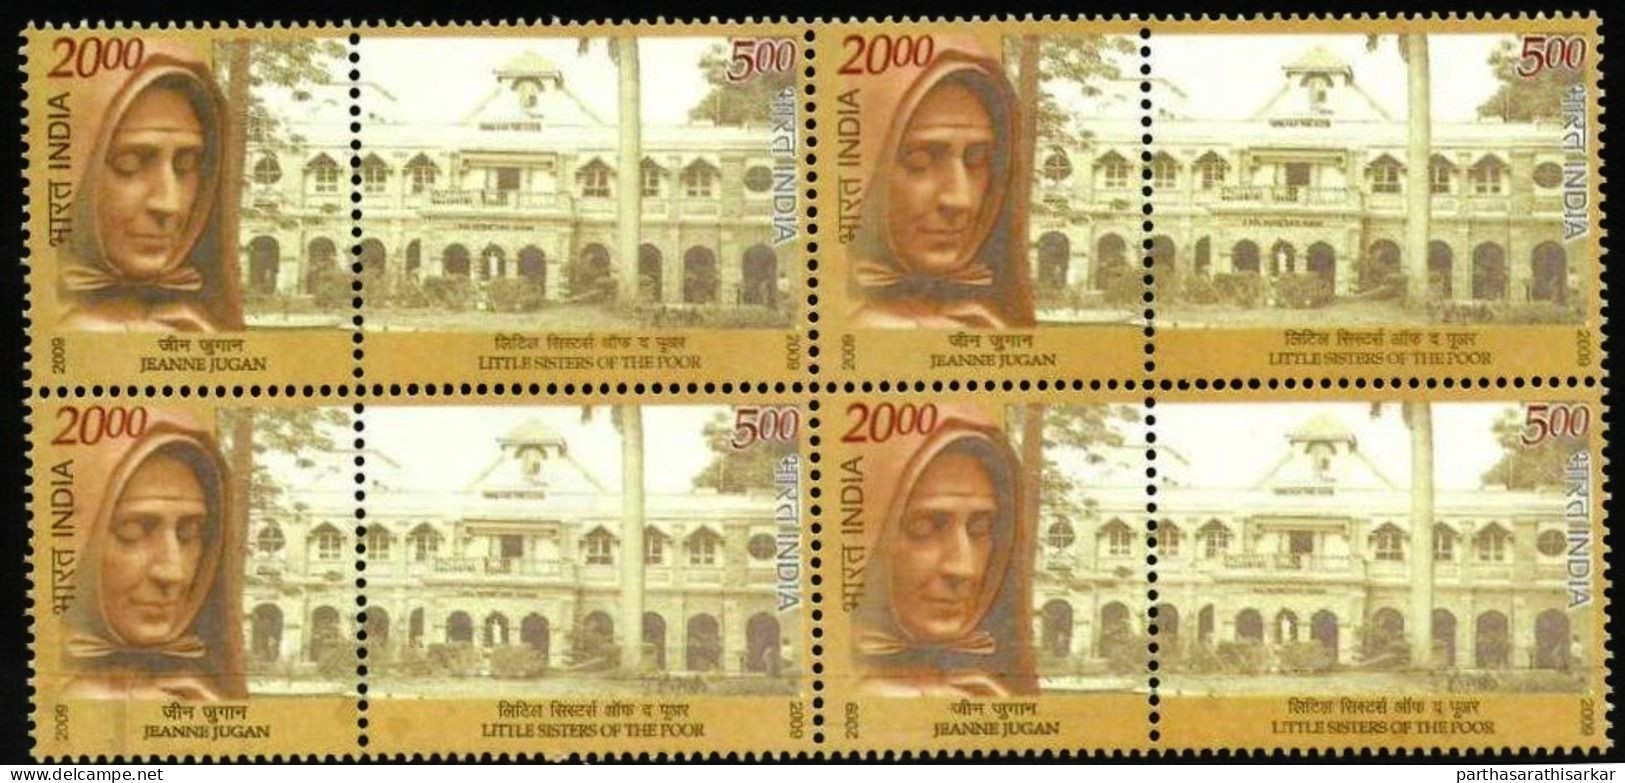 INDIA 2009 LITTLE SISTERS OF POOR COMPLETE SE-TANENT BLOCK OF 4 MNH RARE - Ungebraucht